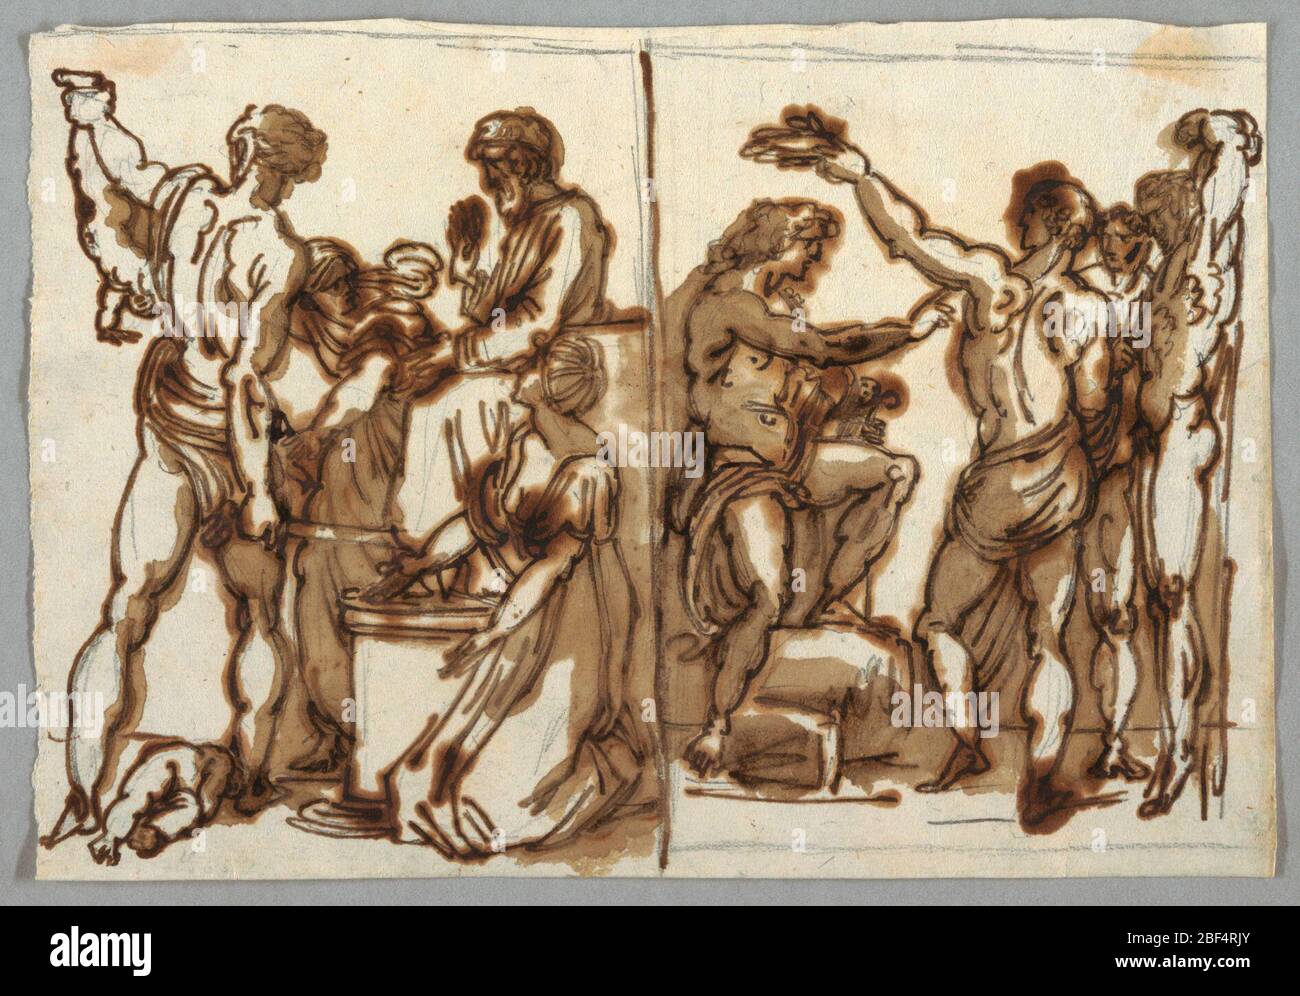 The Judgement of Solomon The Flaying of Marsyas. The judgement has graphite border lines on top and at right. The Marsyas on all sides. Diving ink line between representations. Stock Photo